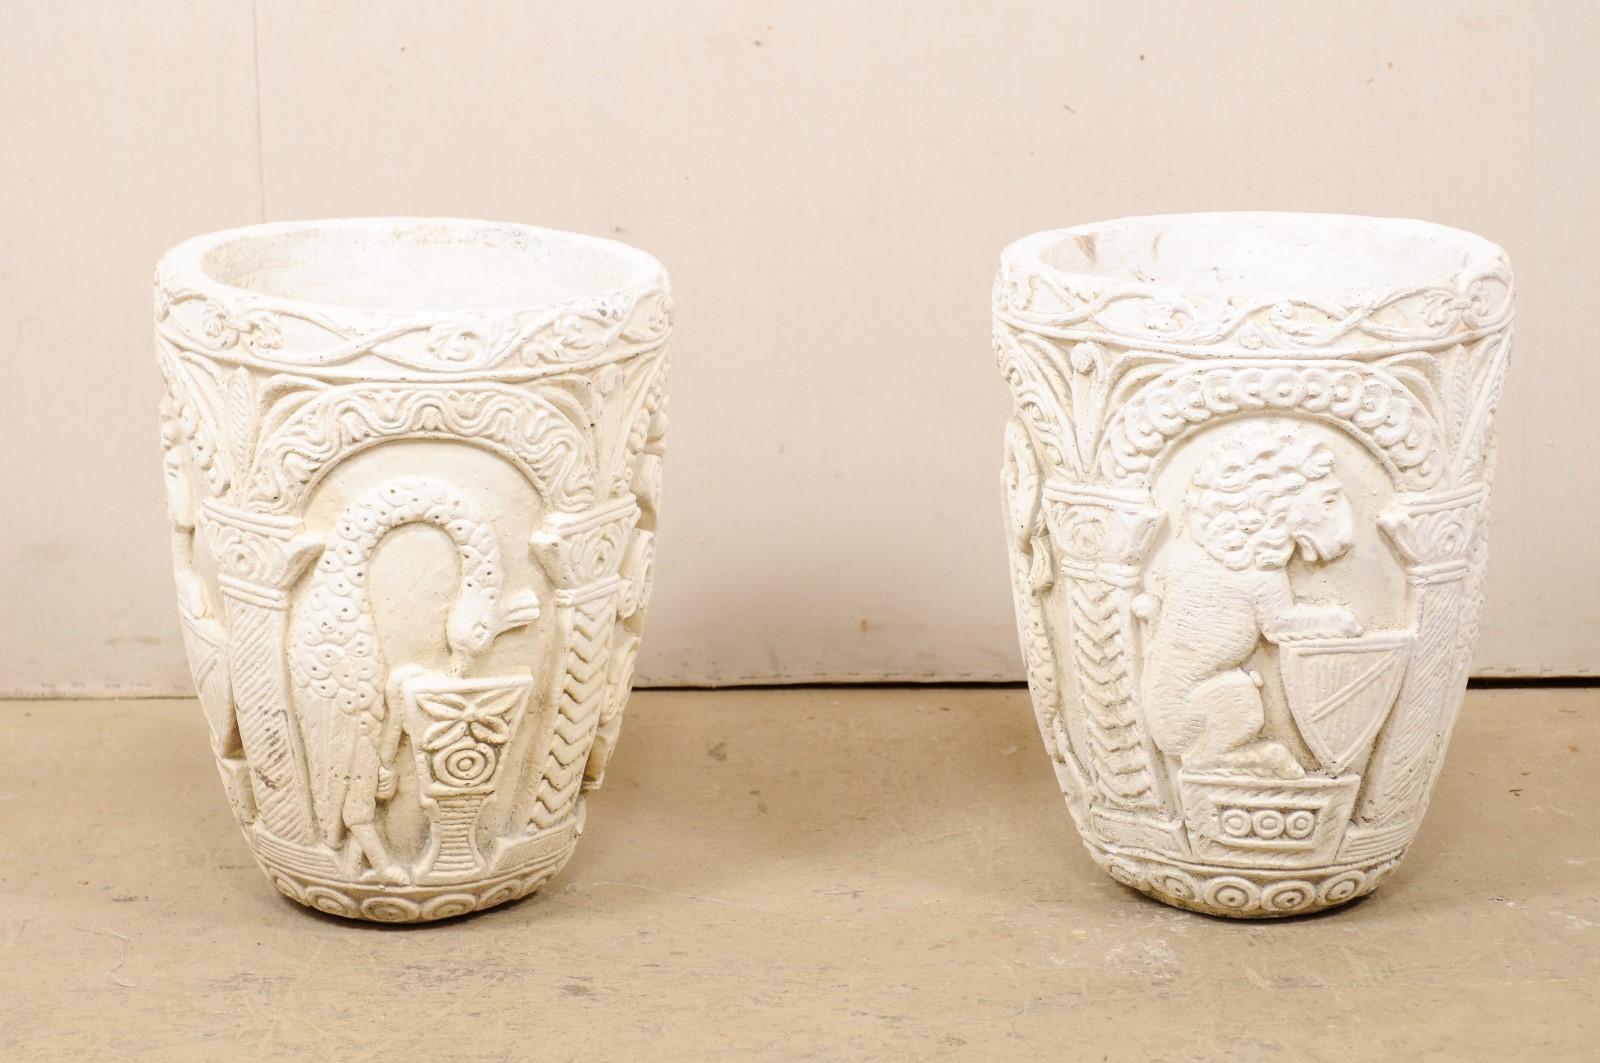 A very special pair of Mizner style, beautifully decorated cast stone outdoor planters from the mid-20th century. This pair of vintage American planters have been created from cast-stone and artfully decorated about the exterior with various